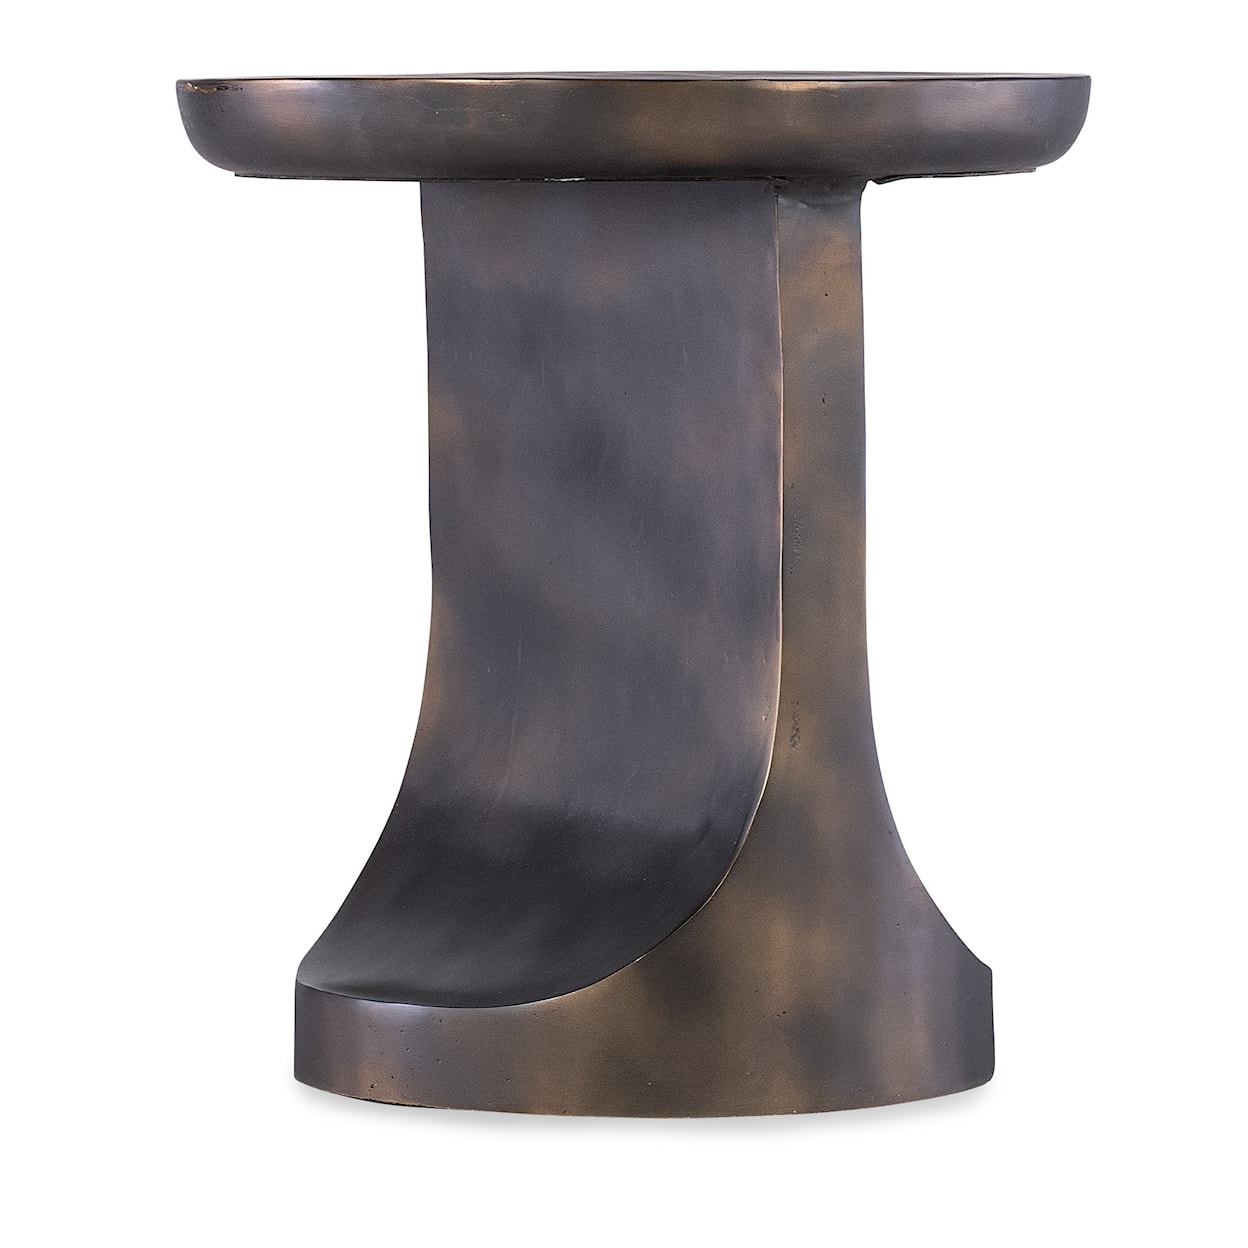 BOBO Intriguing Objects BOBO Intriguing Objects Chess Side Table